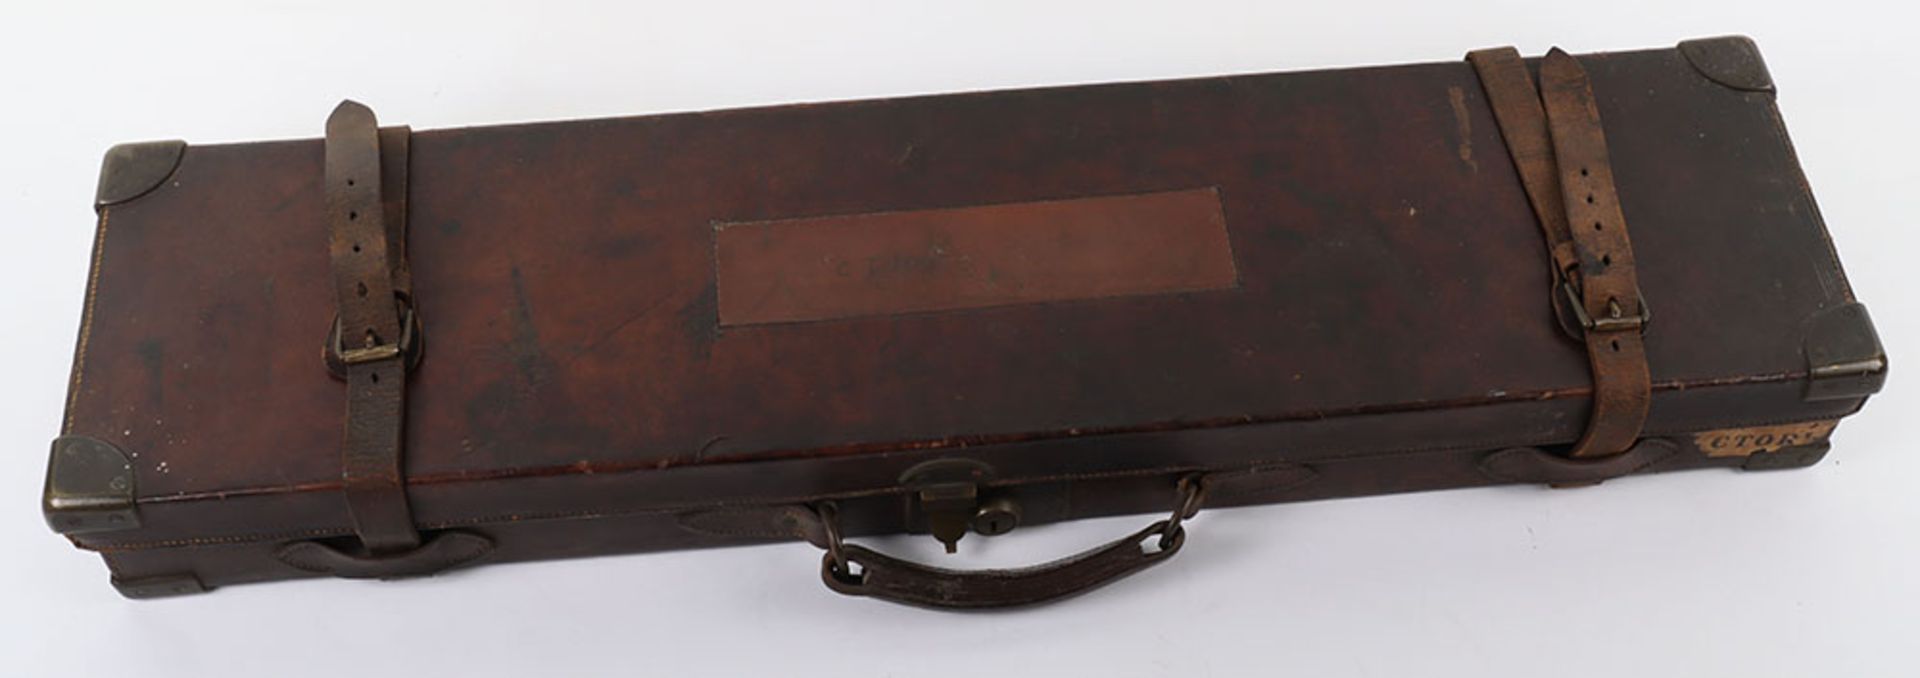 20th century leather and brass mounted single gun case - Image 7 of 9